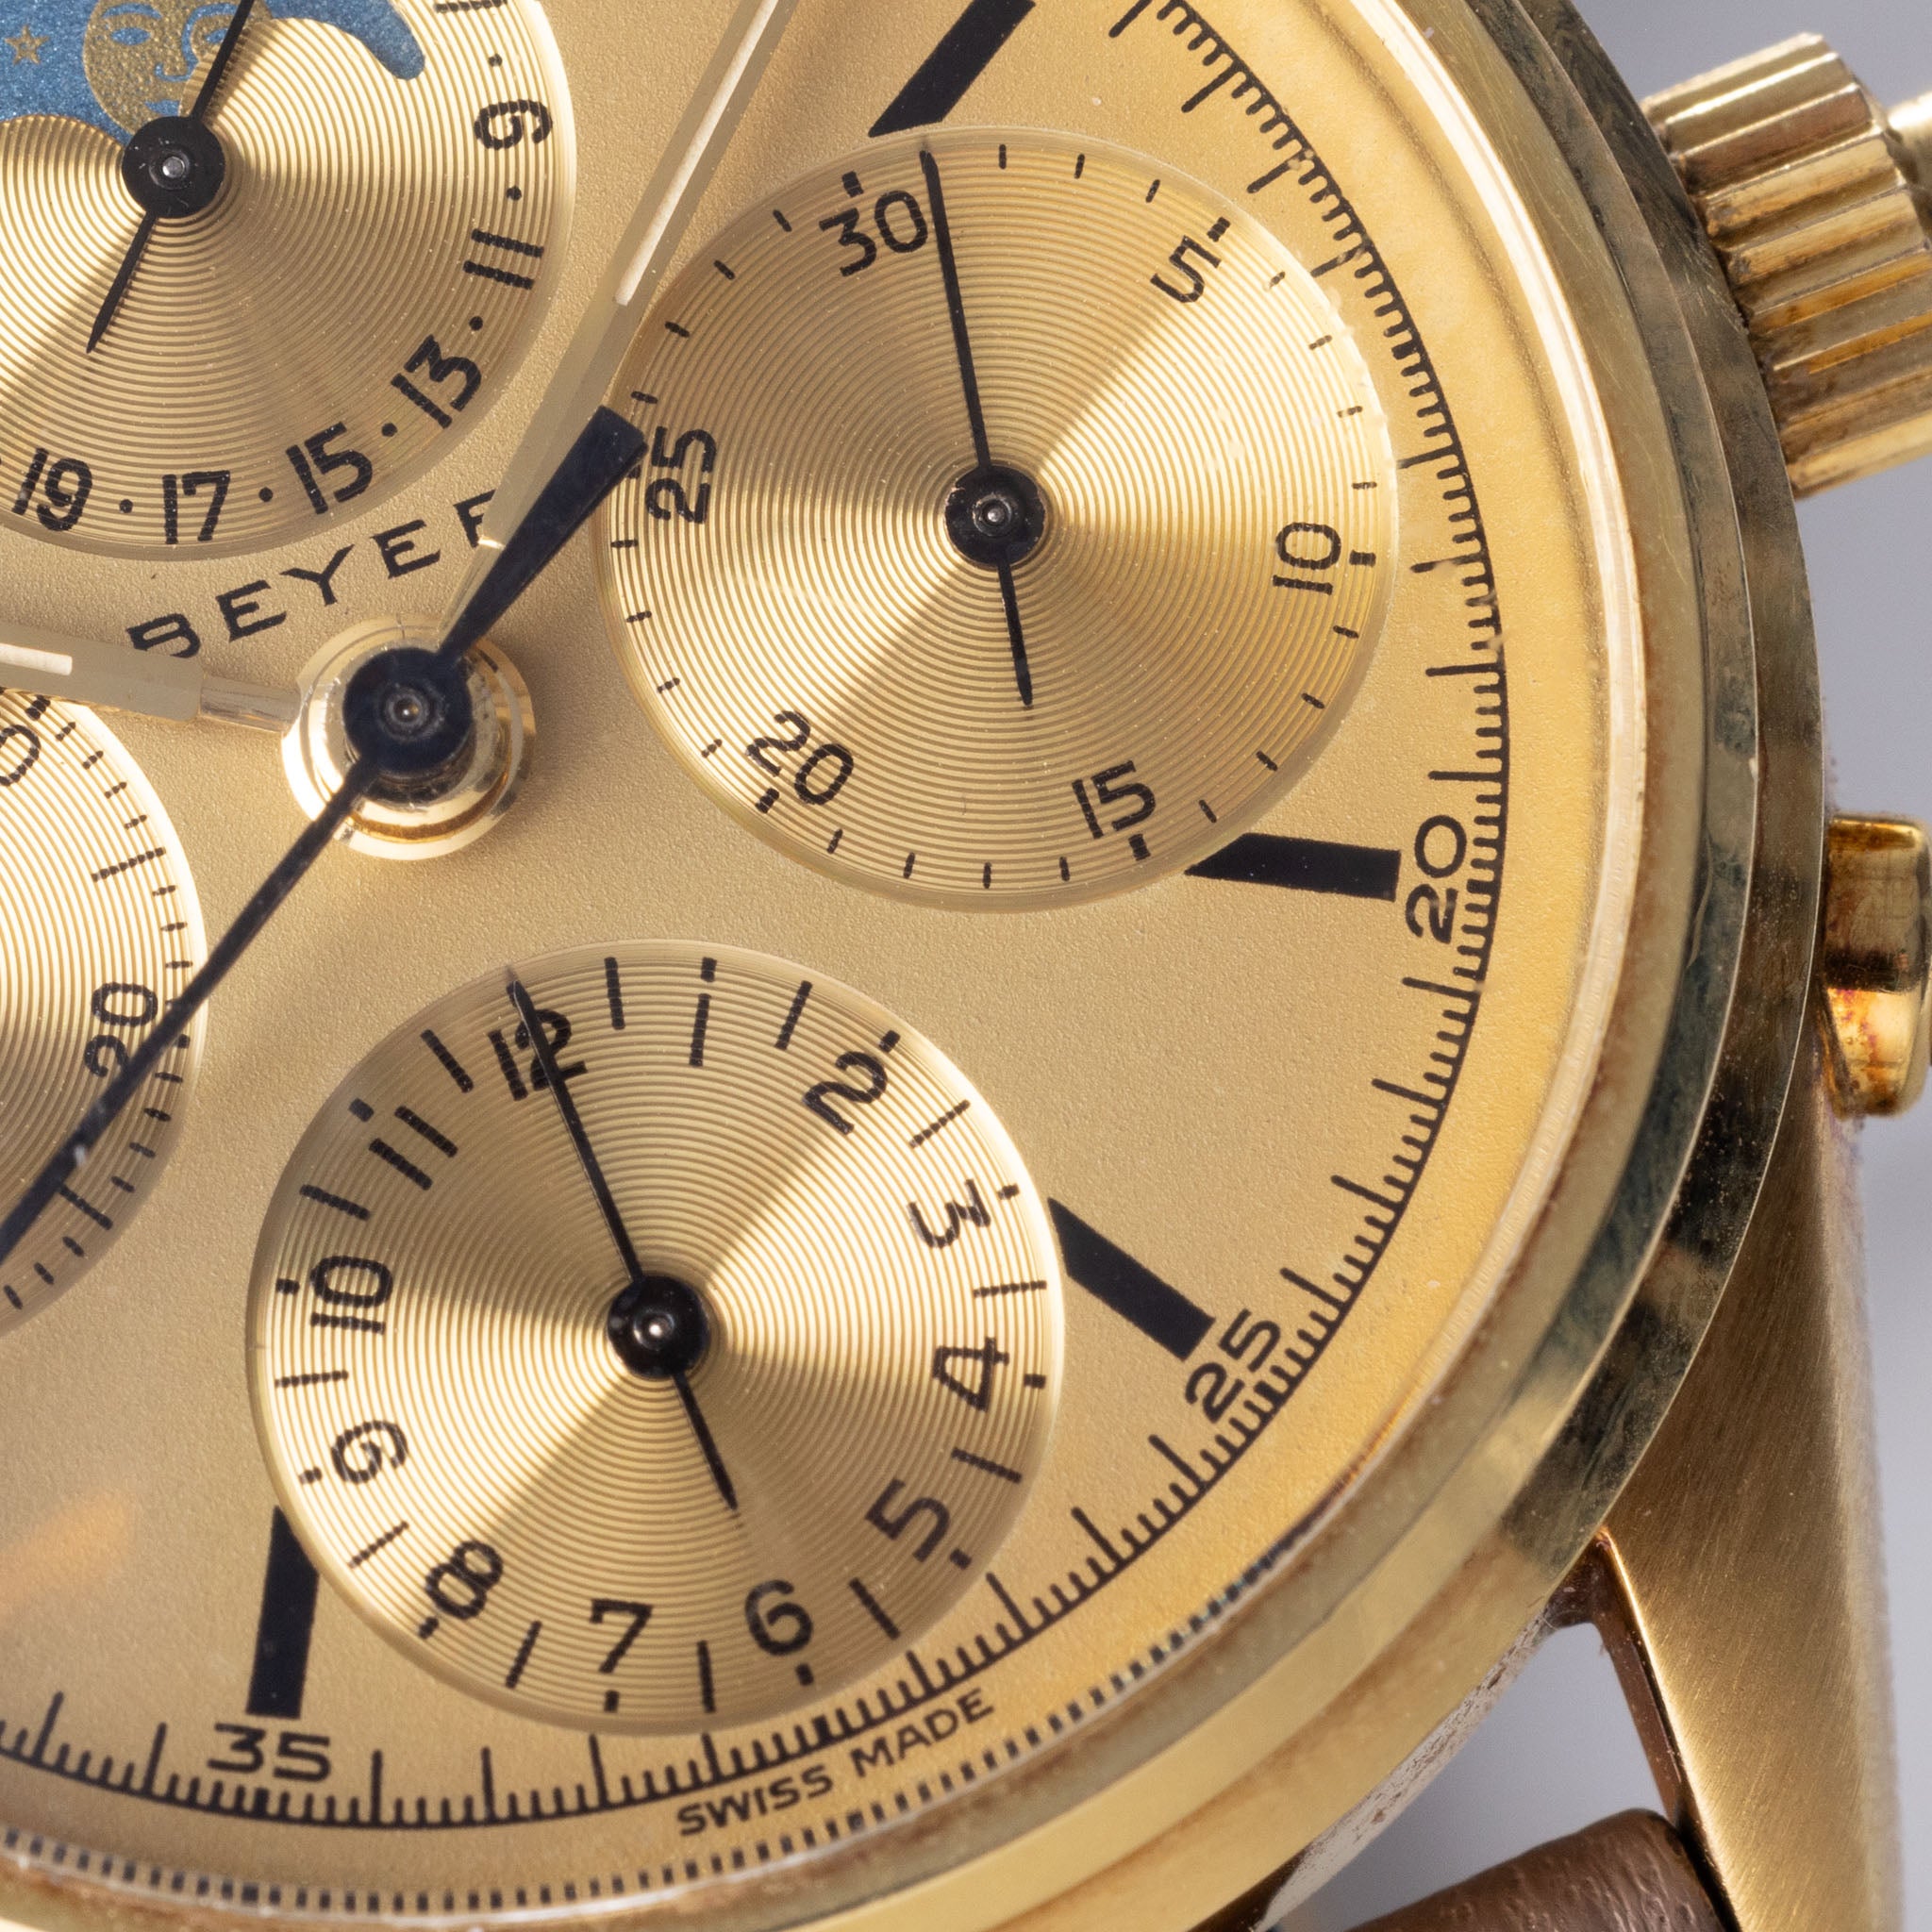 Beyer Split Seconds Moon Phase Chronograph in 18kt Yellow Gold